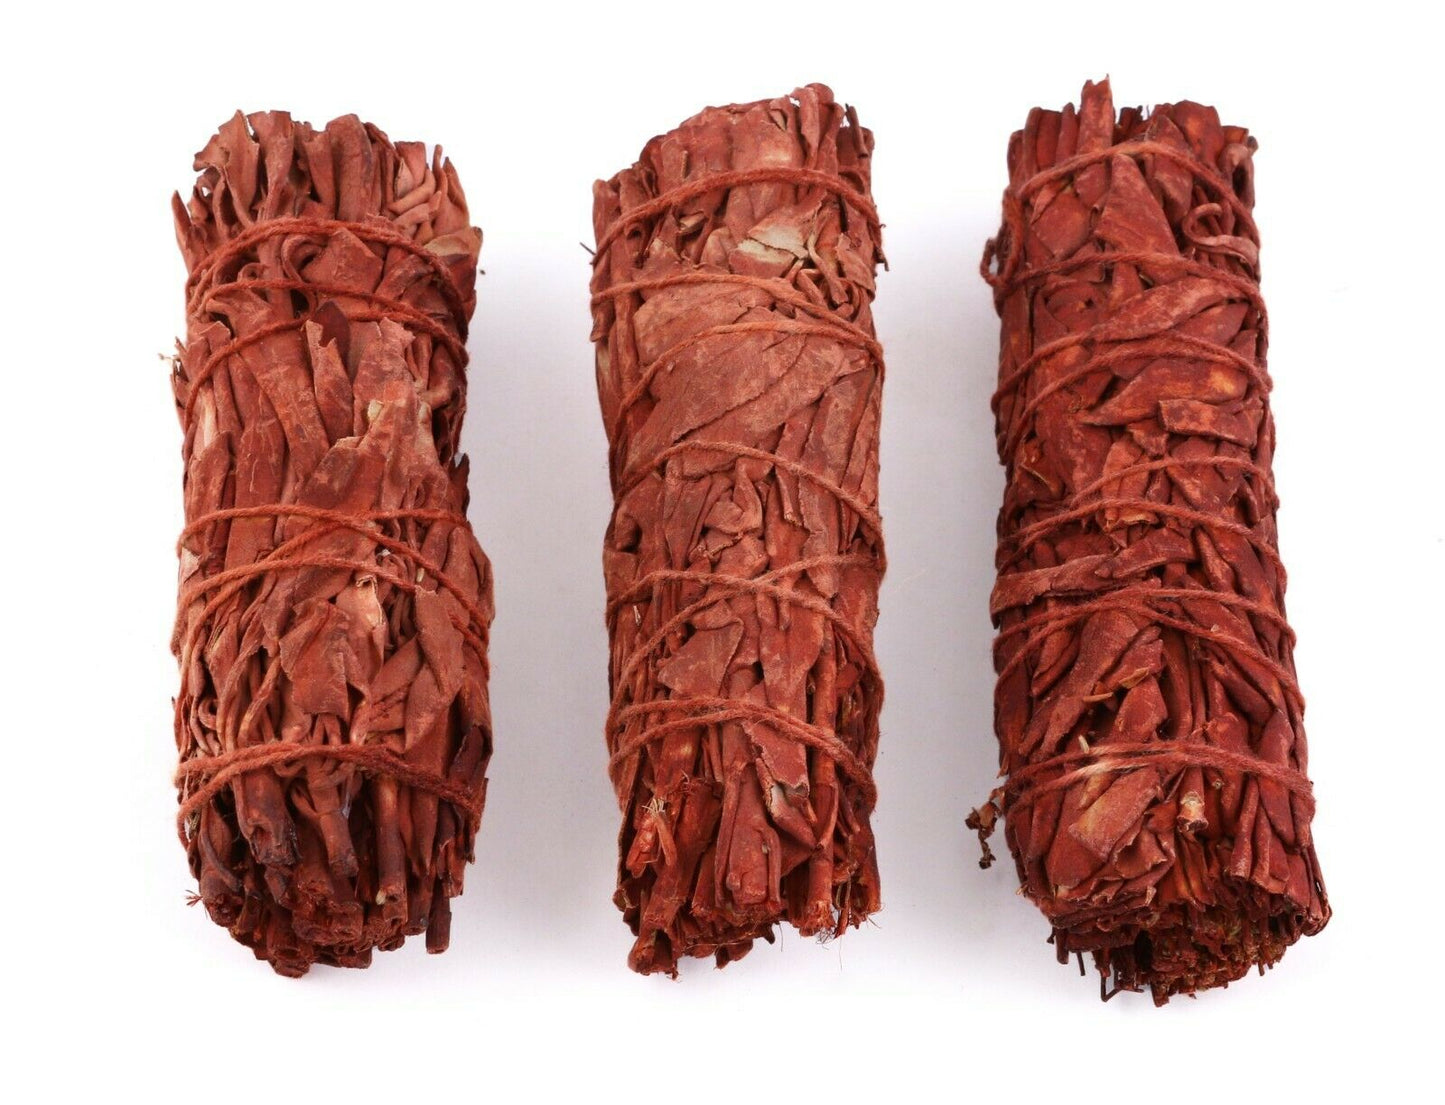 Organic Dragon's Blood Sage smudge sticks, each sold seperately